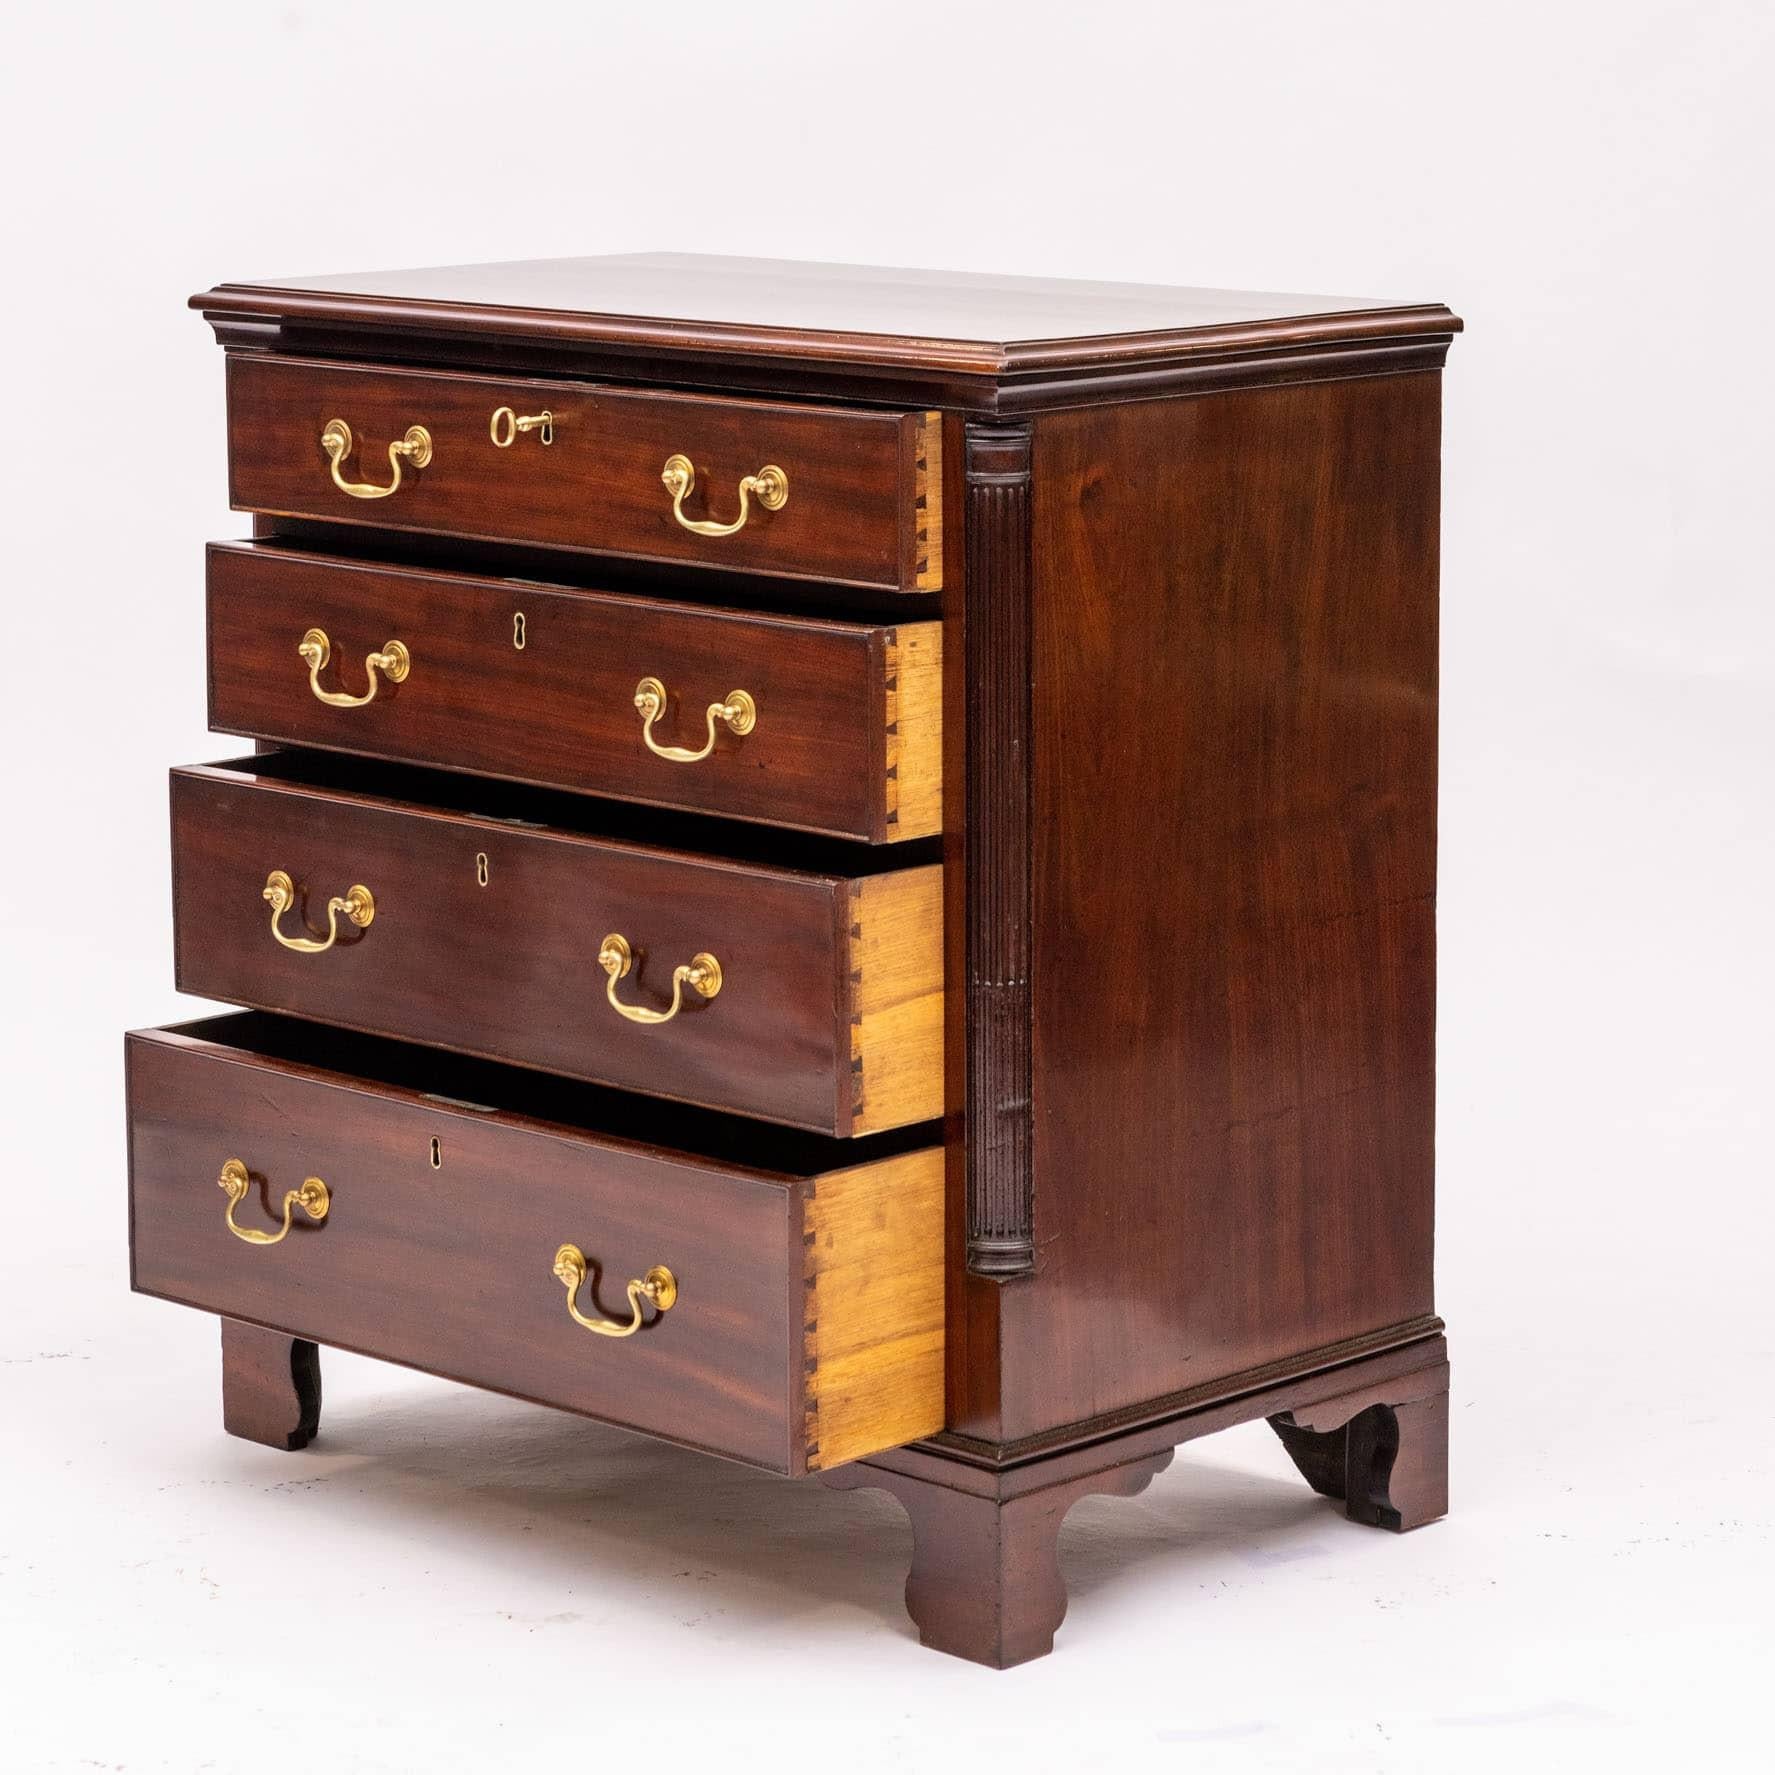 Louis XVI chest of drawers made of solid mahogany.
Profile molding under top plate and sides with fluted quarter columns.
Four drawers with original bronze fittings.

Refinished with respect for the natural beautiful patina.
Copenhagen 1780 - 1790.
